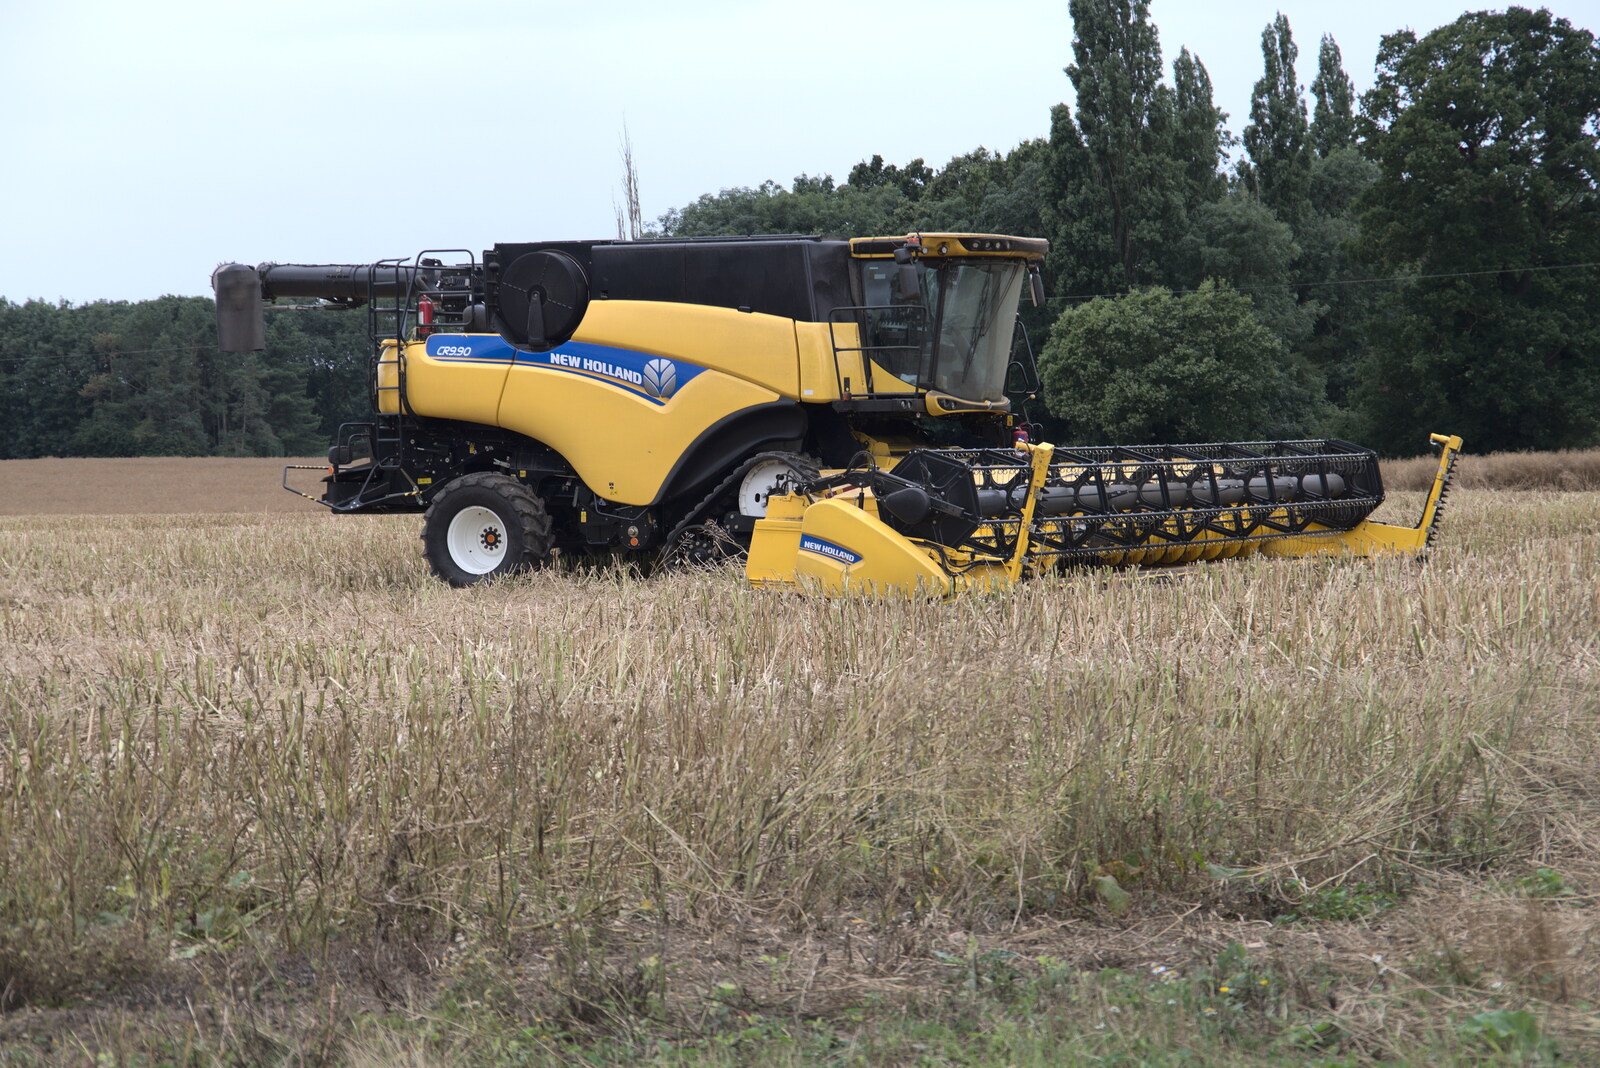 A shiny New Holland combine is parked up from Meg-fest, and Sean Visits, Bressingham and Brome, Suffolk - 1st August 2021